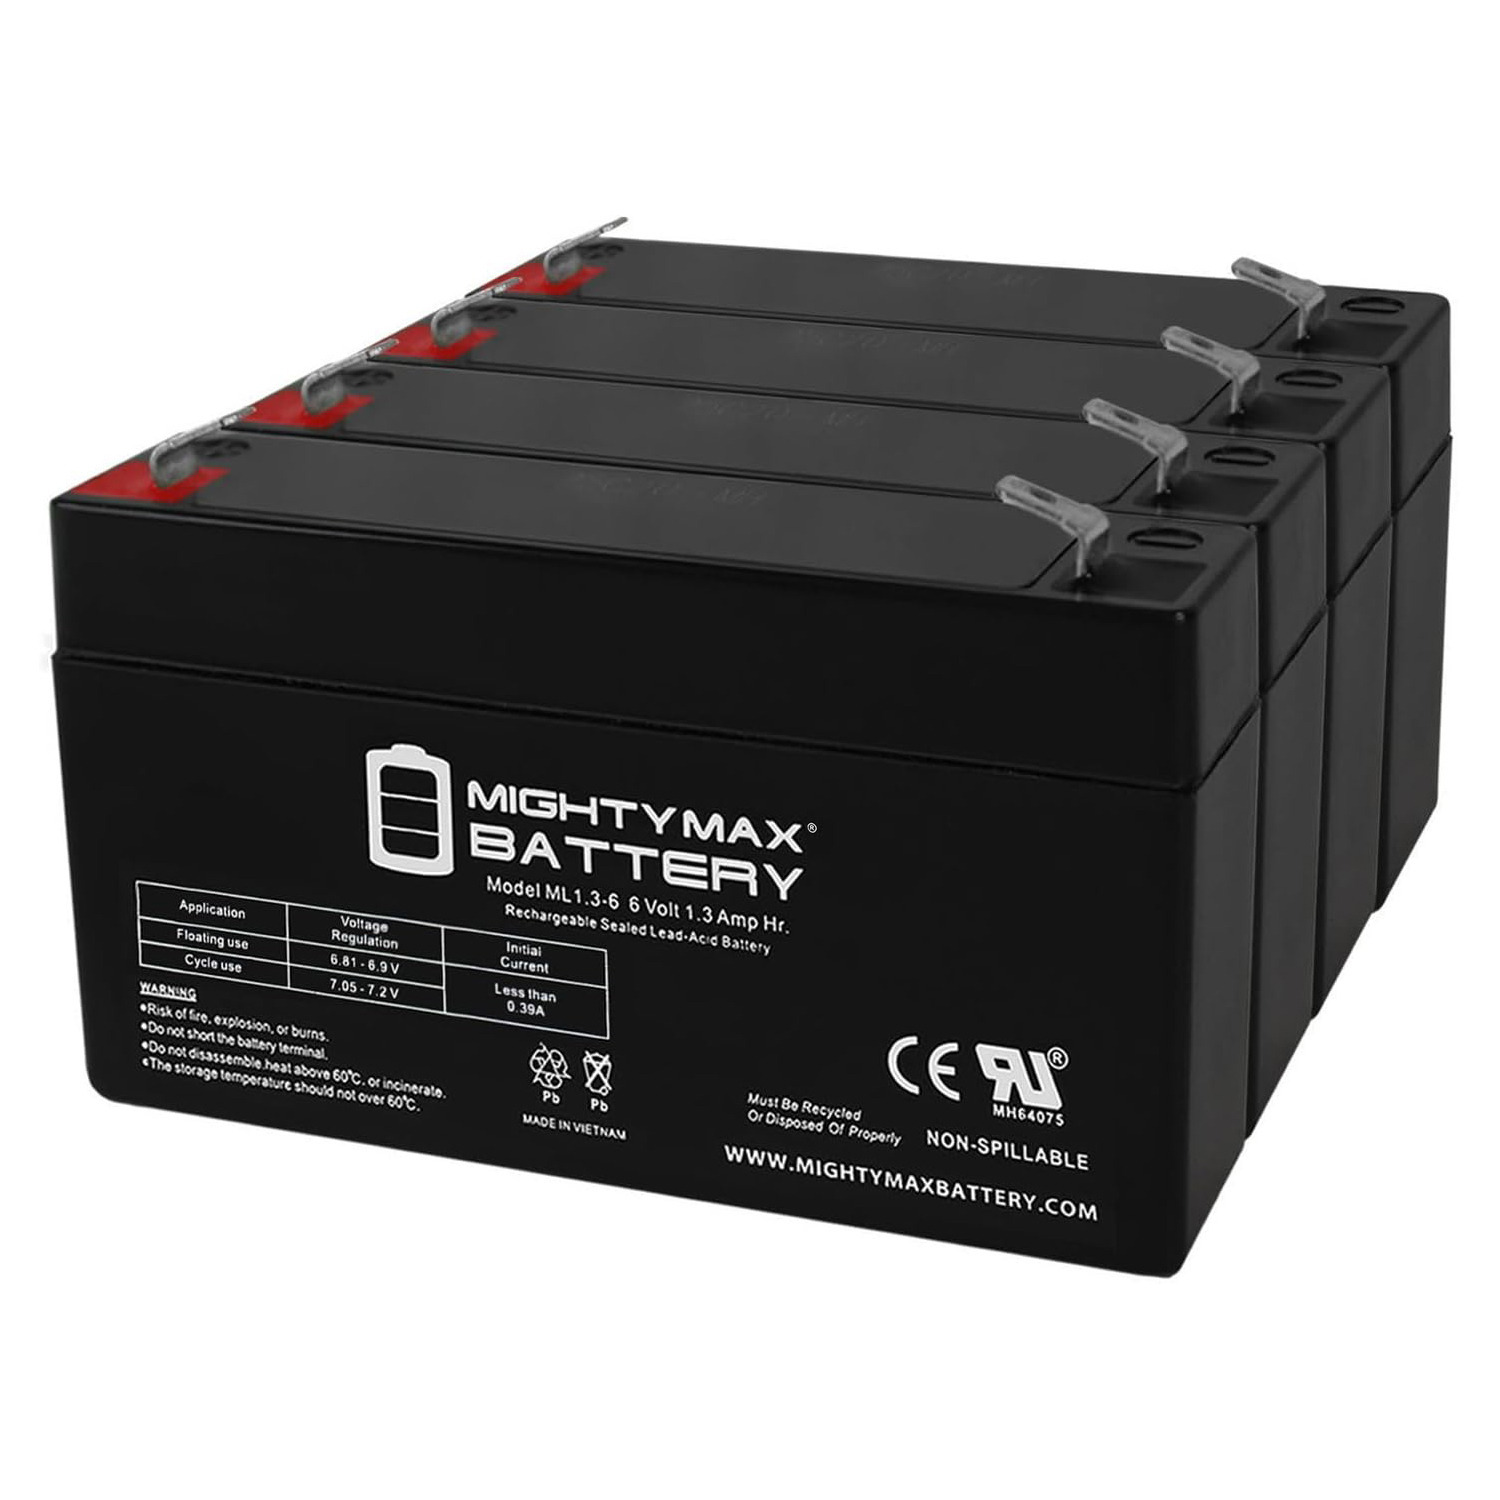 6V 1.3Ah SLA Replacement Battery for Yuasa ES1.2-6 - 4 Pack